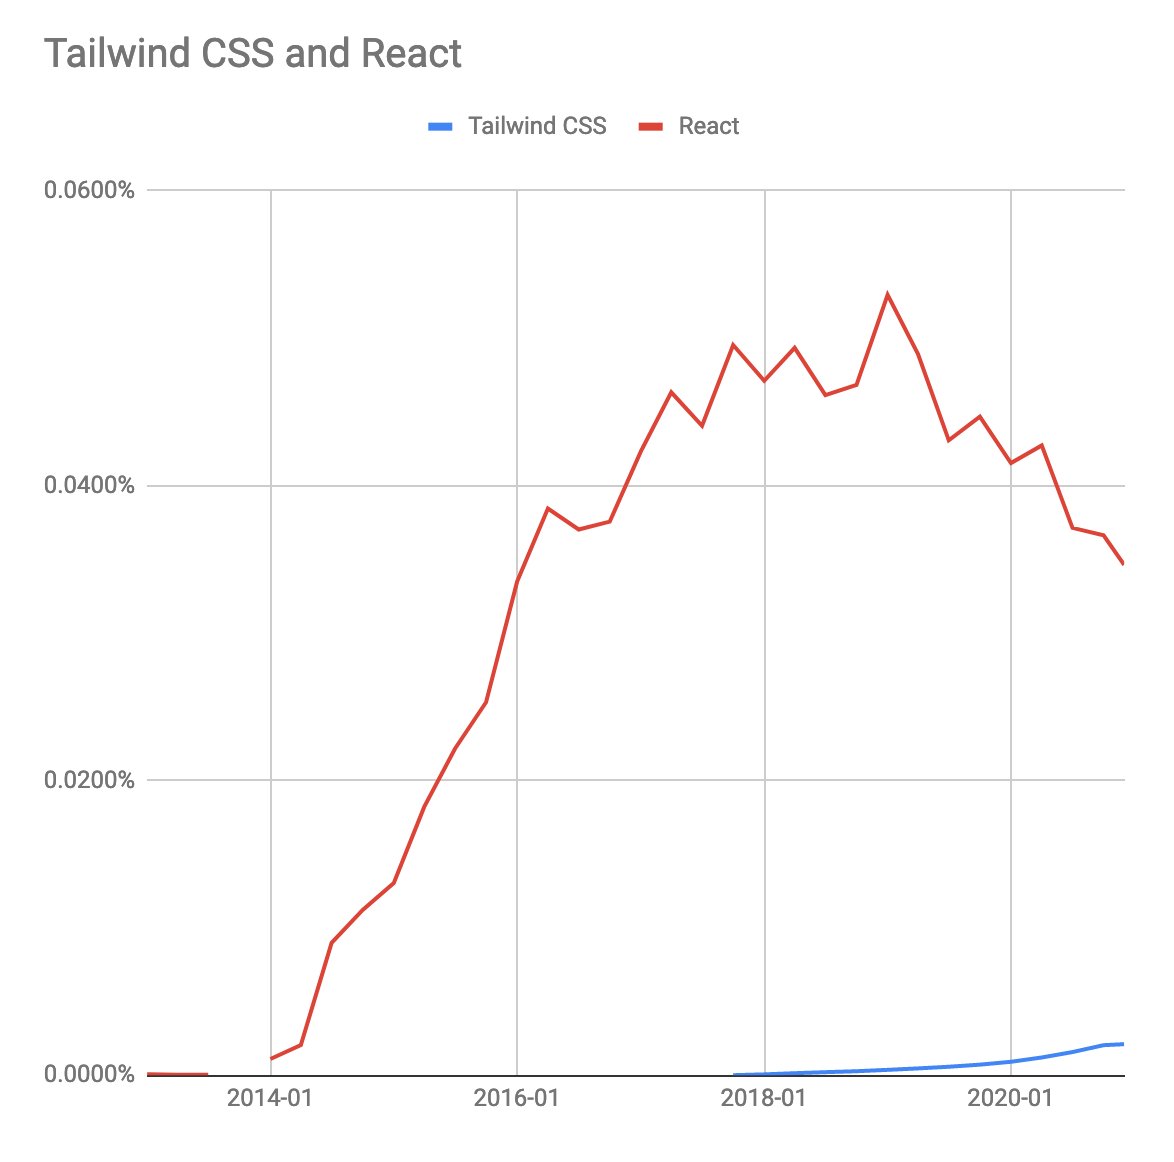  @TimHaines wanted to know how Tailwind CSS is doing and the answer is *beautifully*, what a pretty curve that is. Maybe it's one of the non-competing frameworks putting pressure on the registry overall?